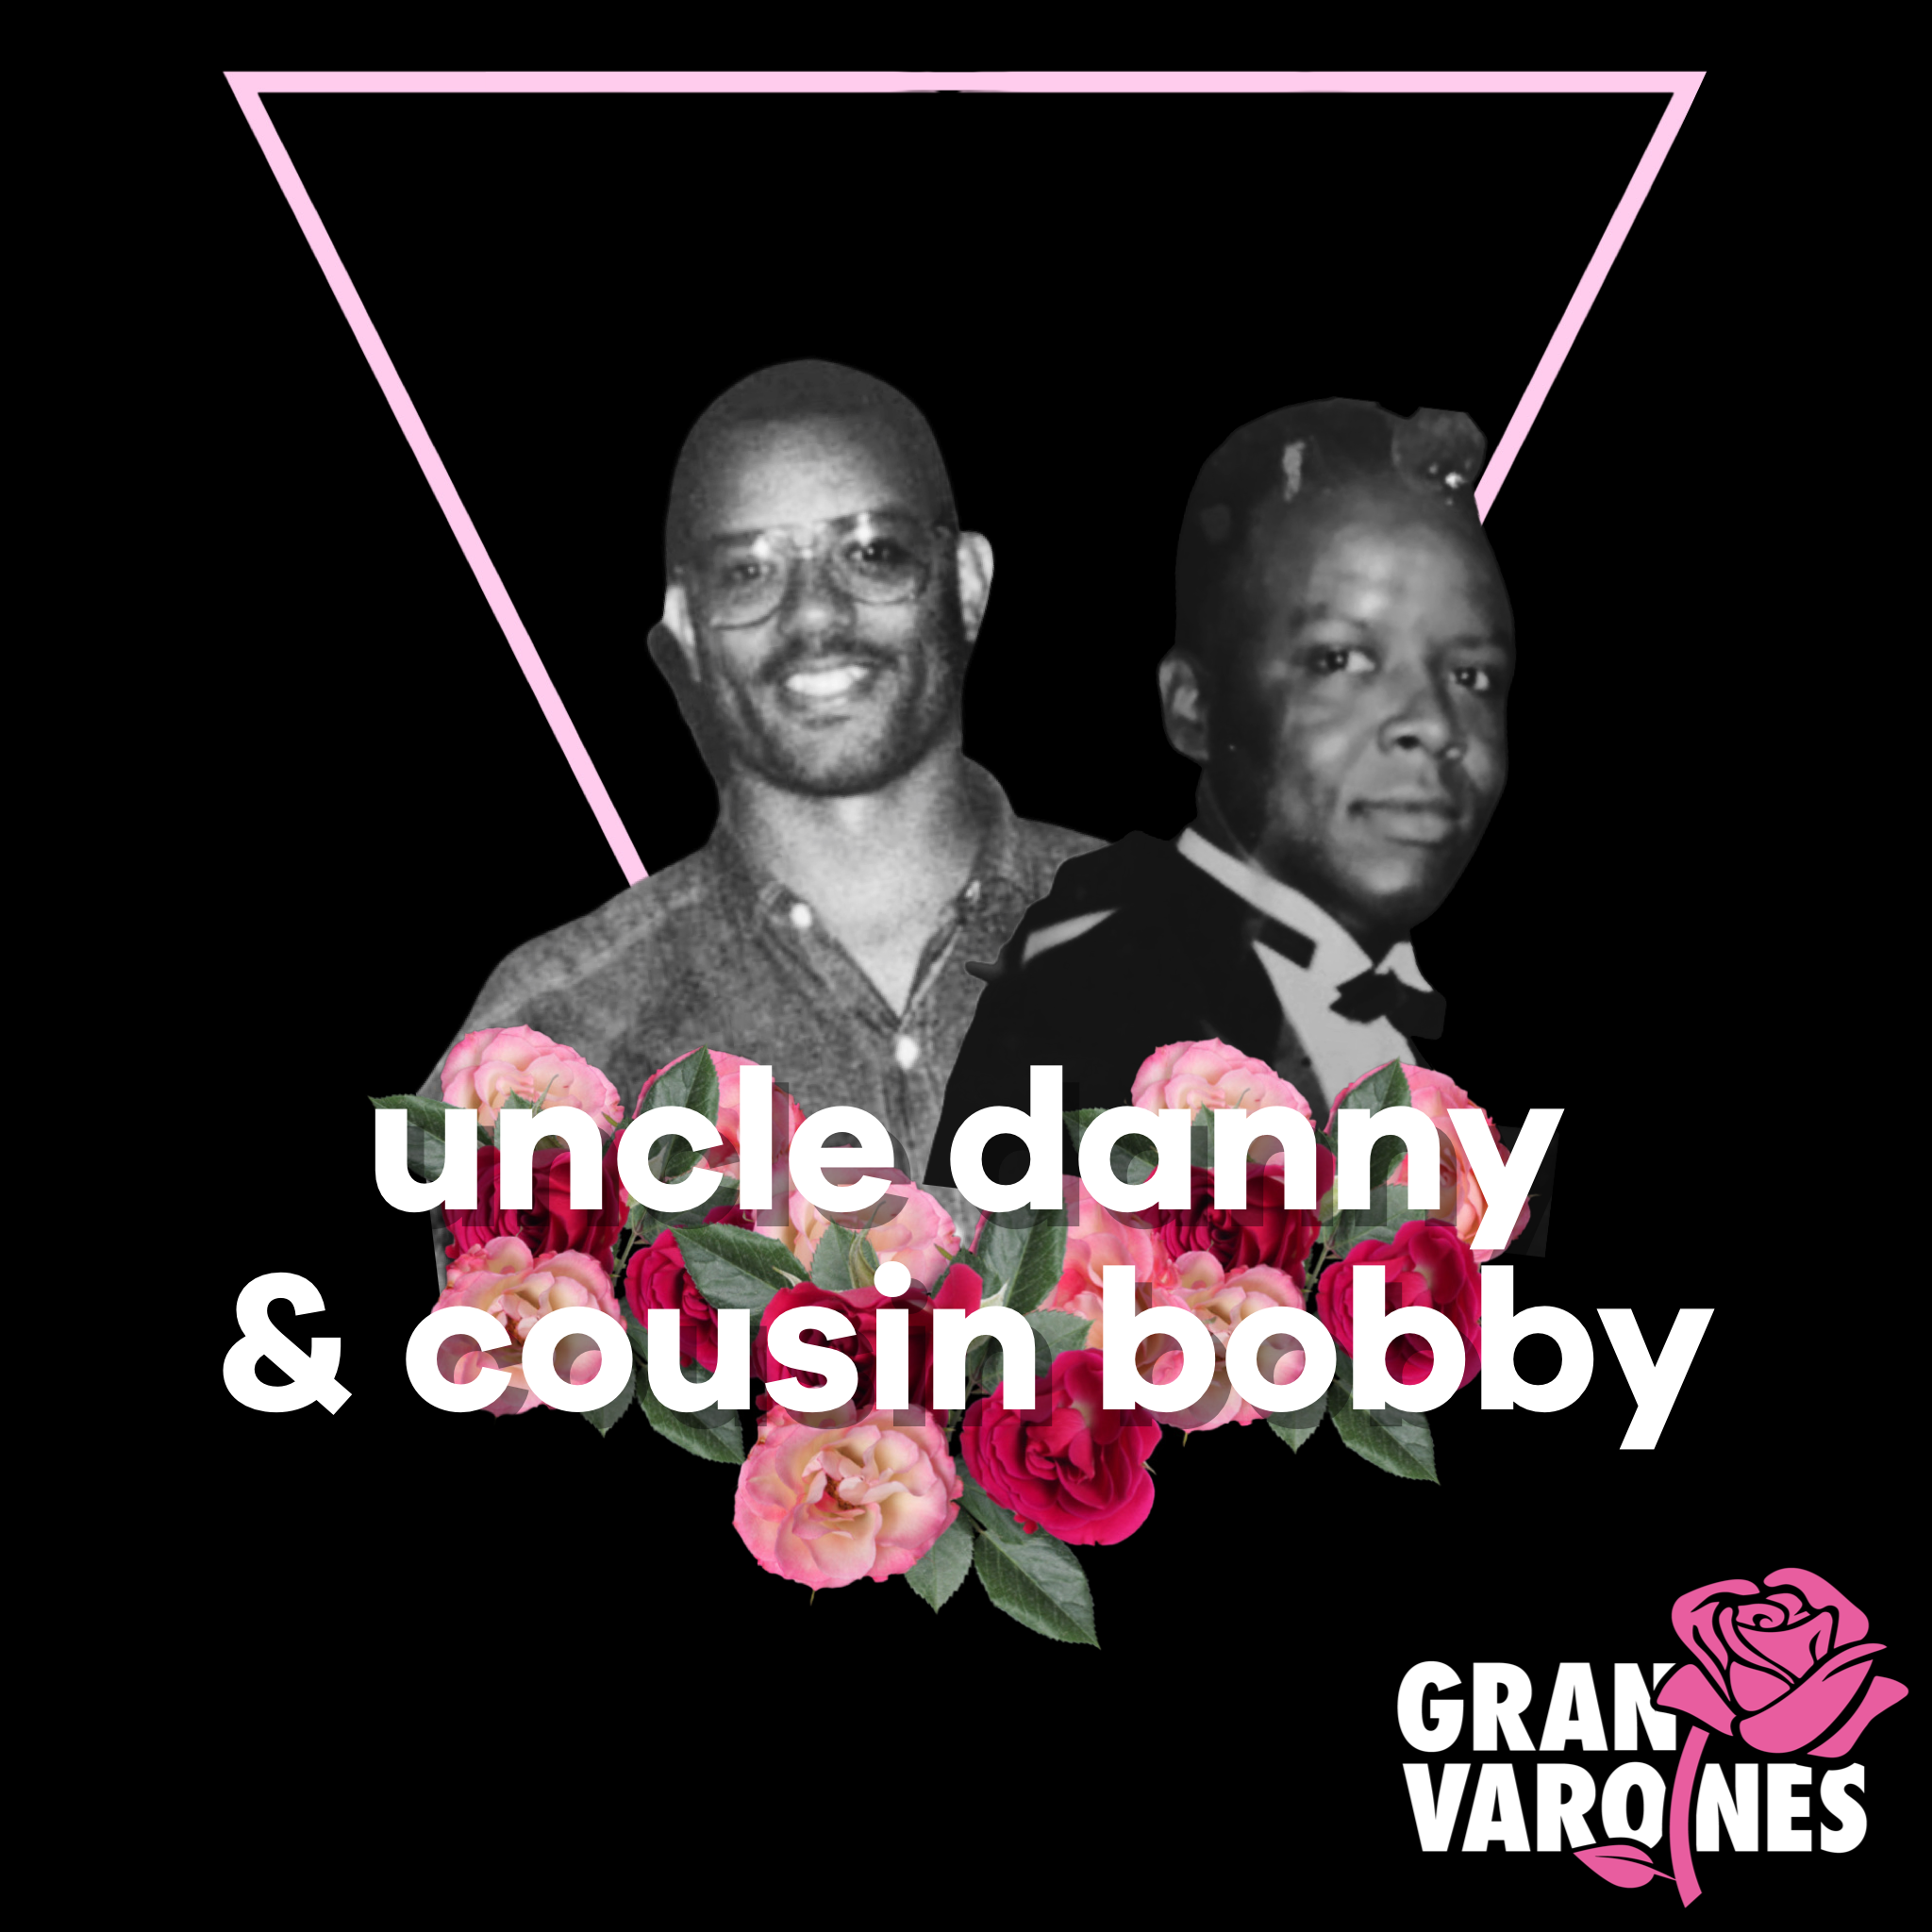 UNCLE DANNY & COUSIN BOBBY